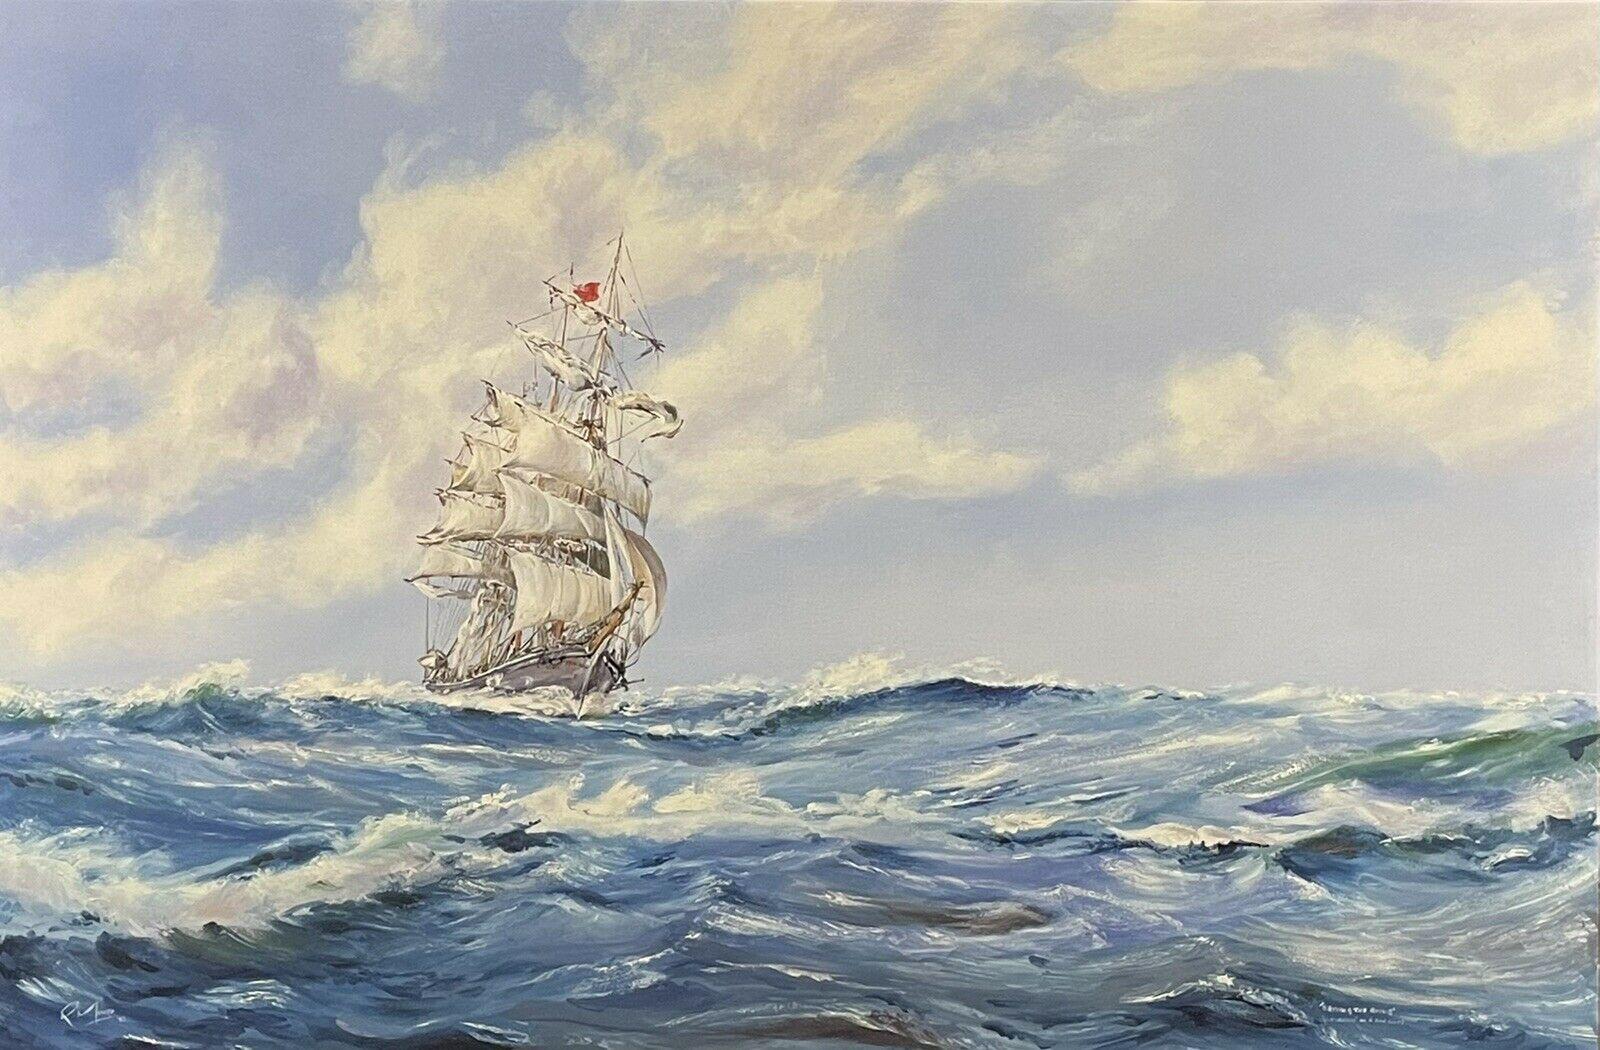 Unknown Landscape Painting - Setting the Royals - Very Large Marine Oil Painting - Tall Sailing Ship at Sea